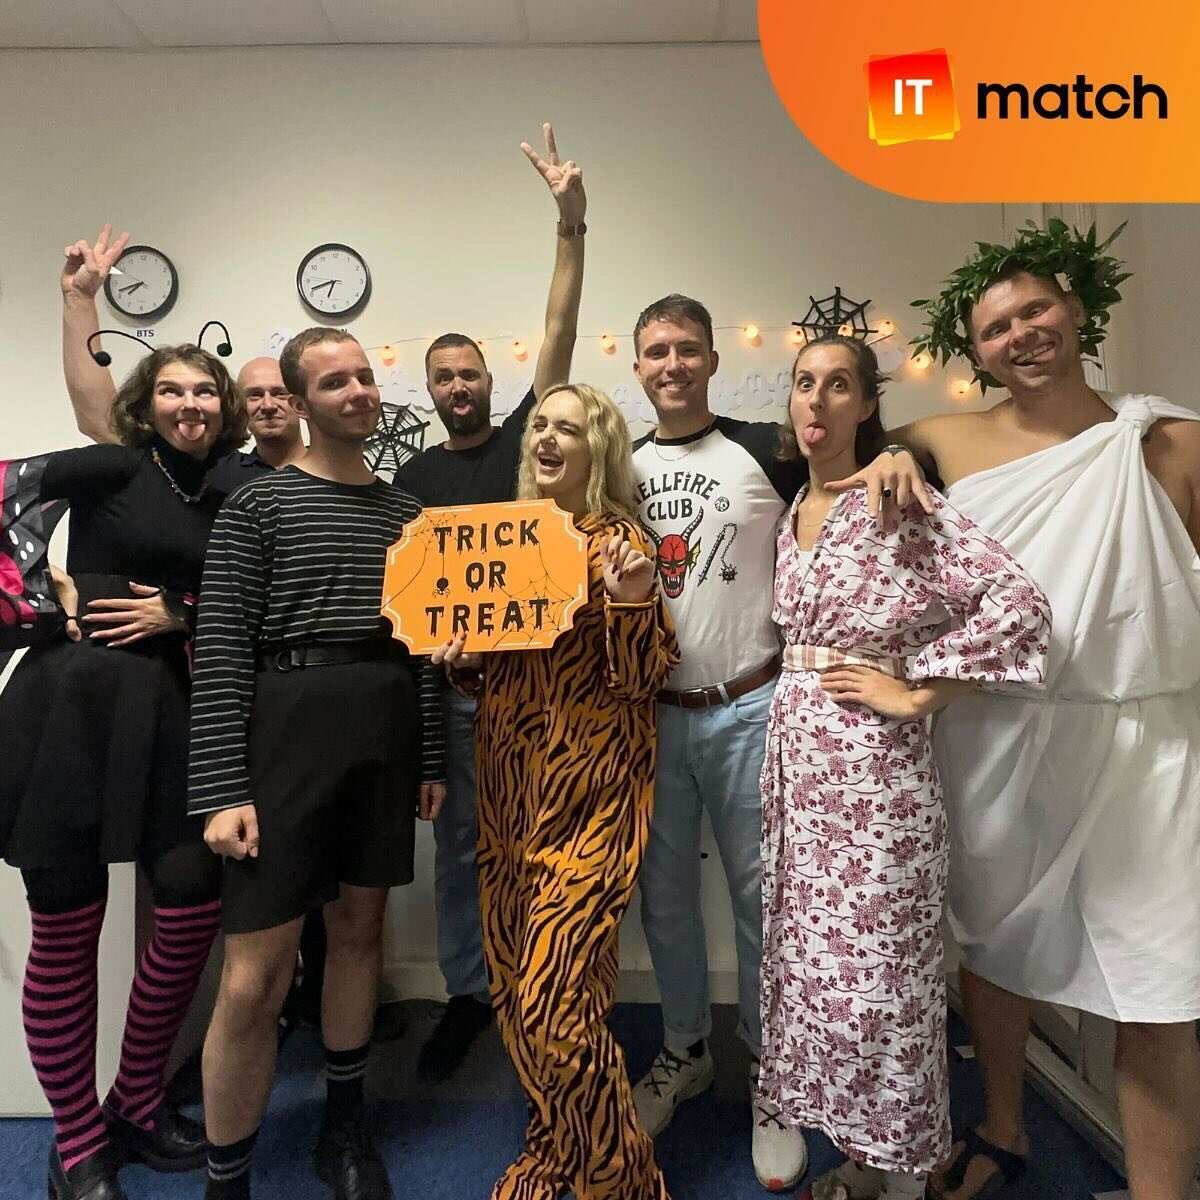 Wickedly good time at our ITmatch Halloween party! 
Thanks to everyone who made it a hauntingly memorable night! 
🎃🕸️ #halloween